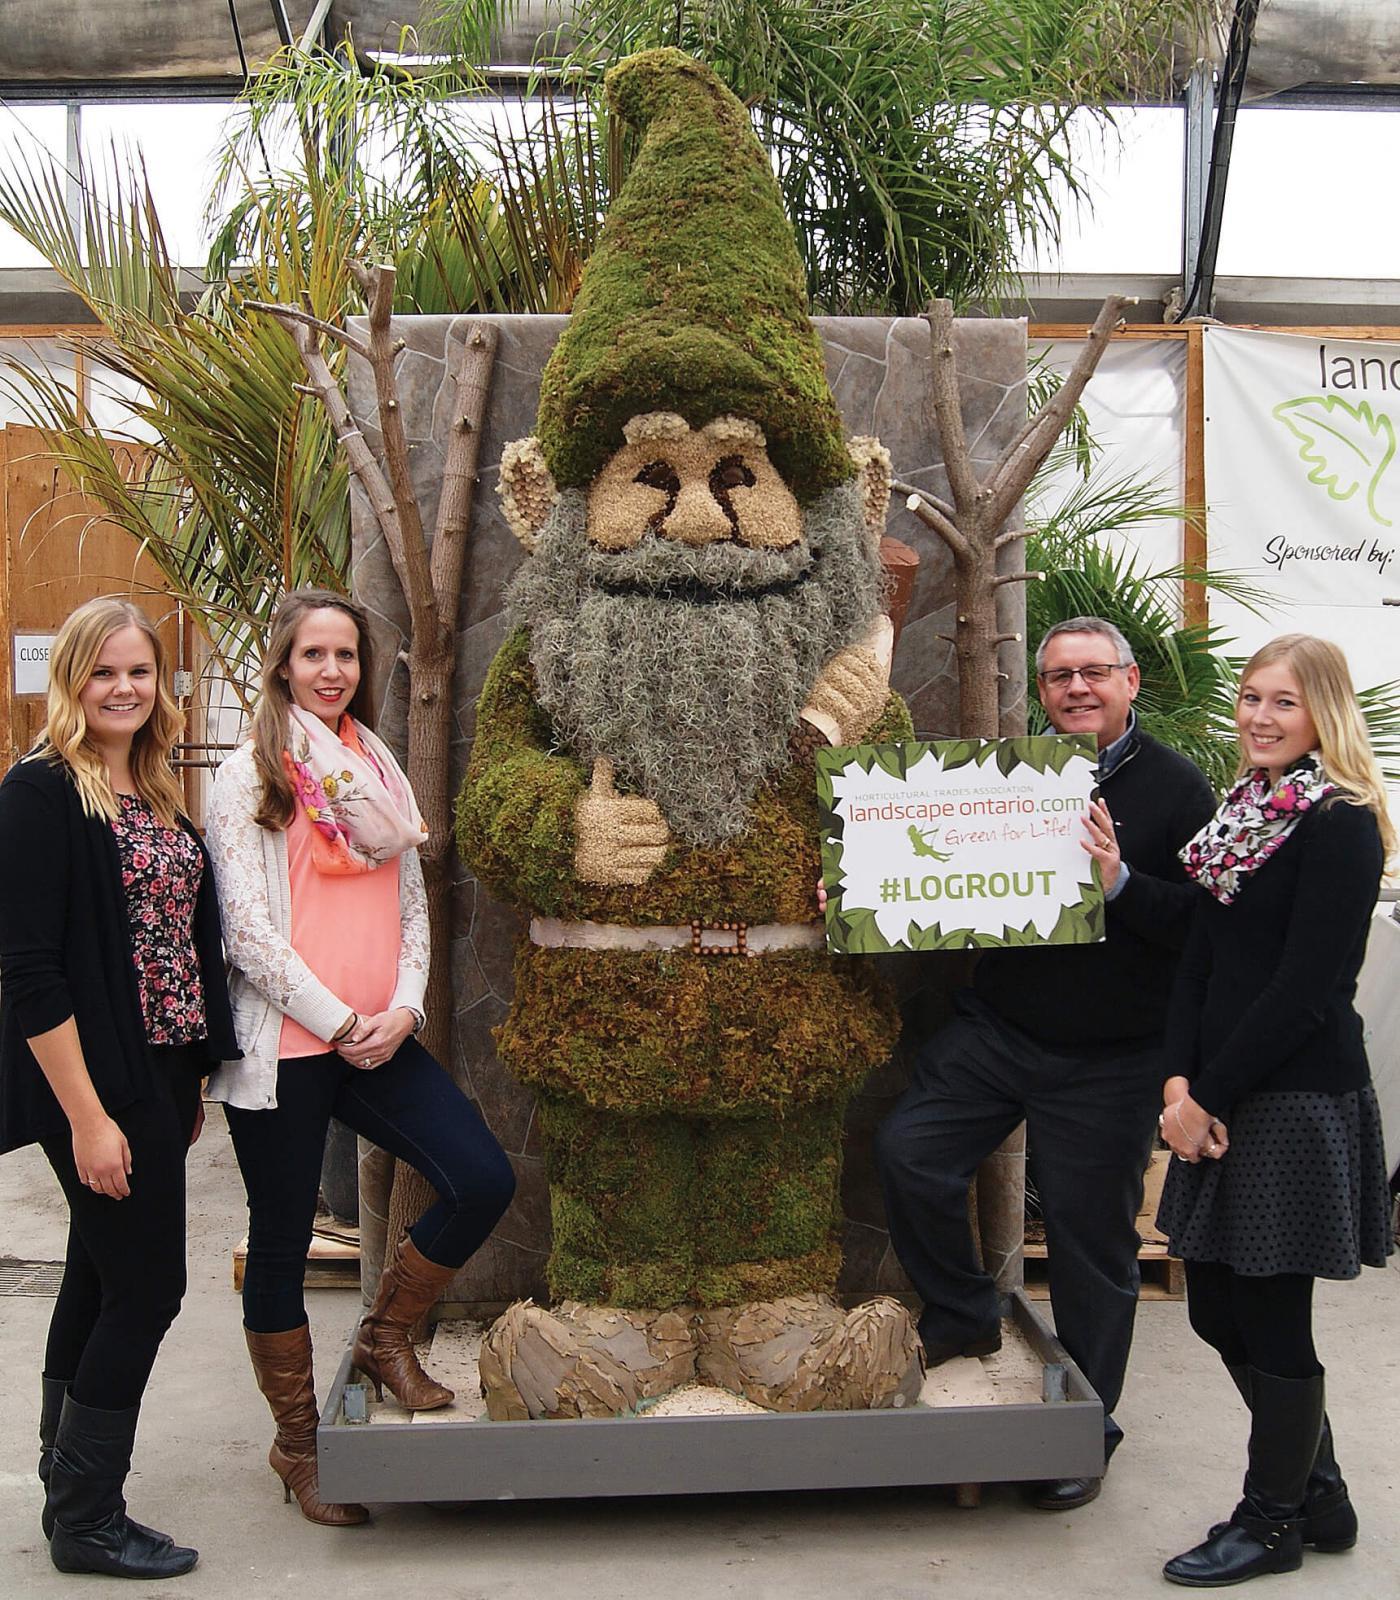 Grout the giant gnome is ready for a starring role in 2016 with his team of LO membership department staff, from left, Cassandra Wiesner, Rachel Cerelli, Denis Flanagan and Myscha Burton.